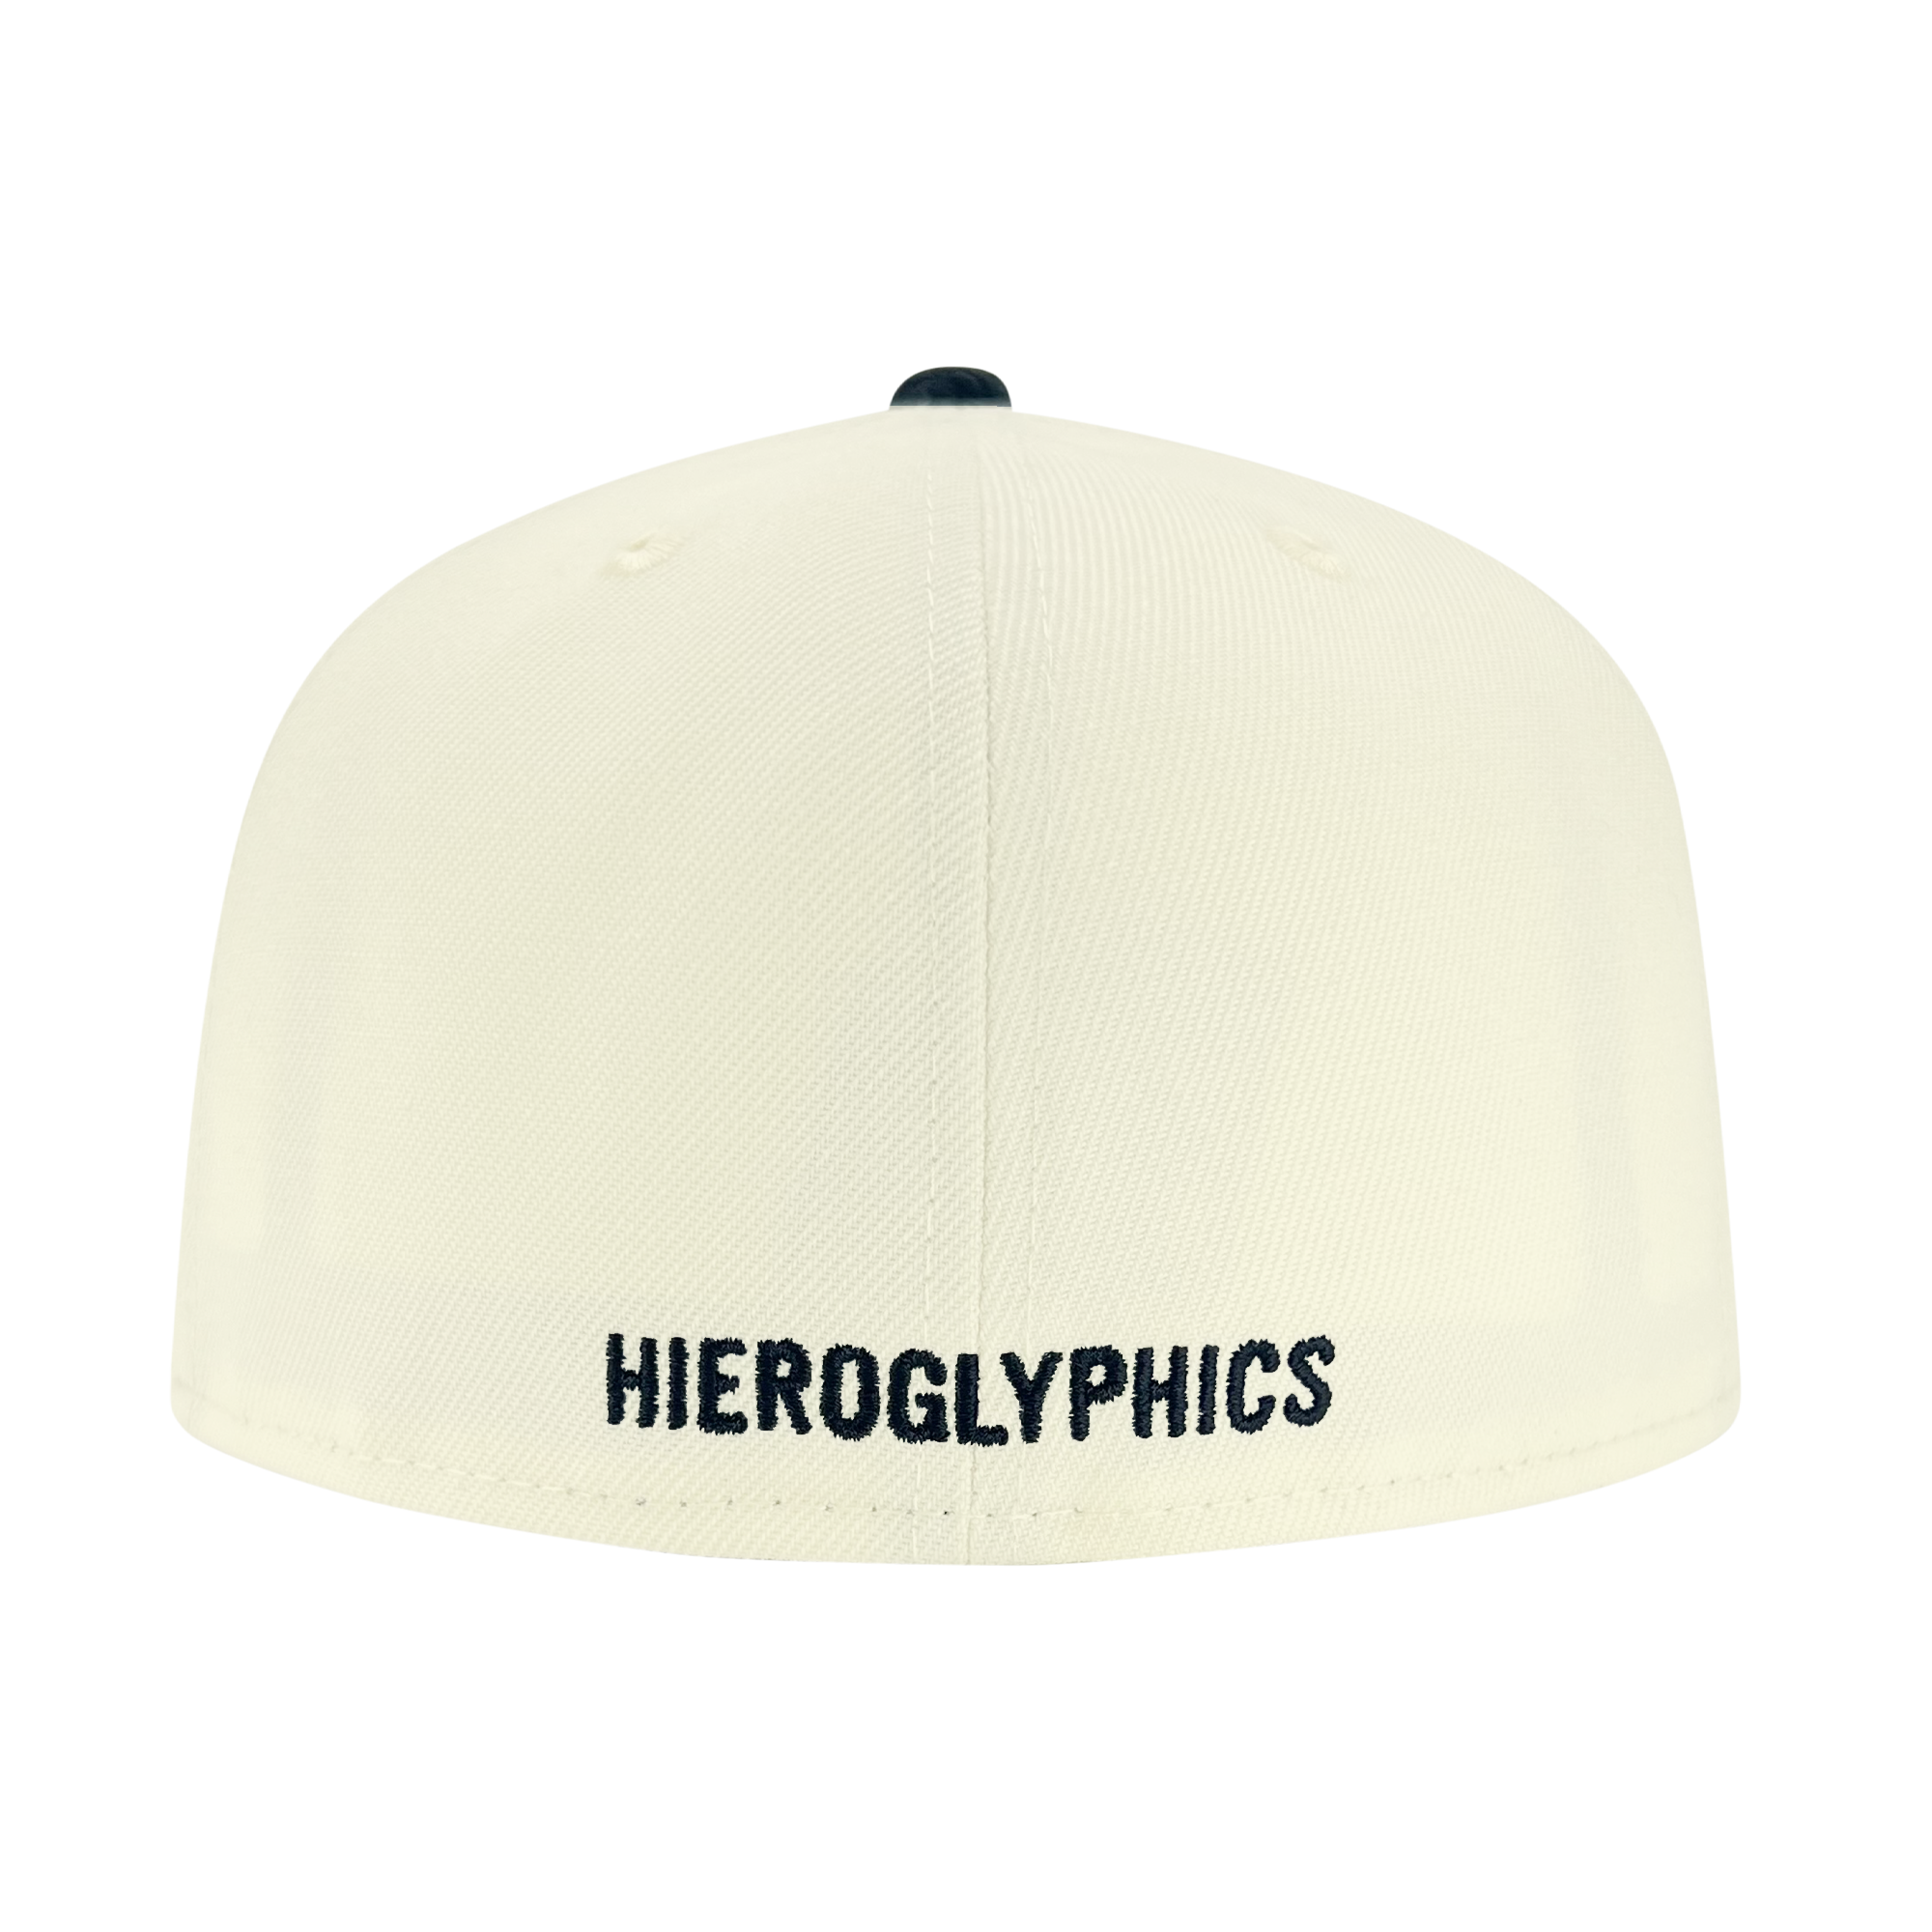 Back view of New Era 59FIFTY fitted cap with chrome crown and embroidered HIEROGLYPHICS wordmark.